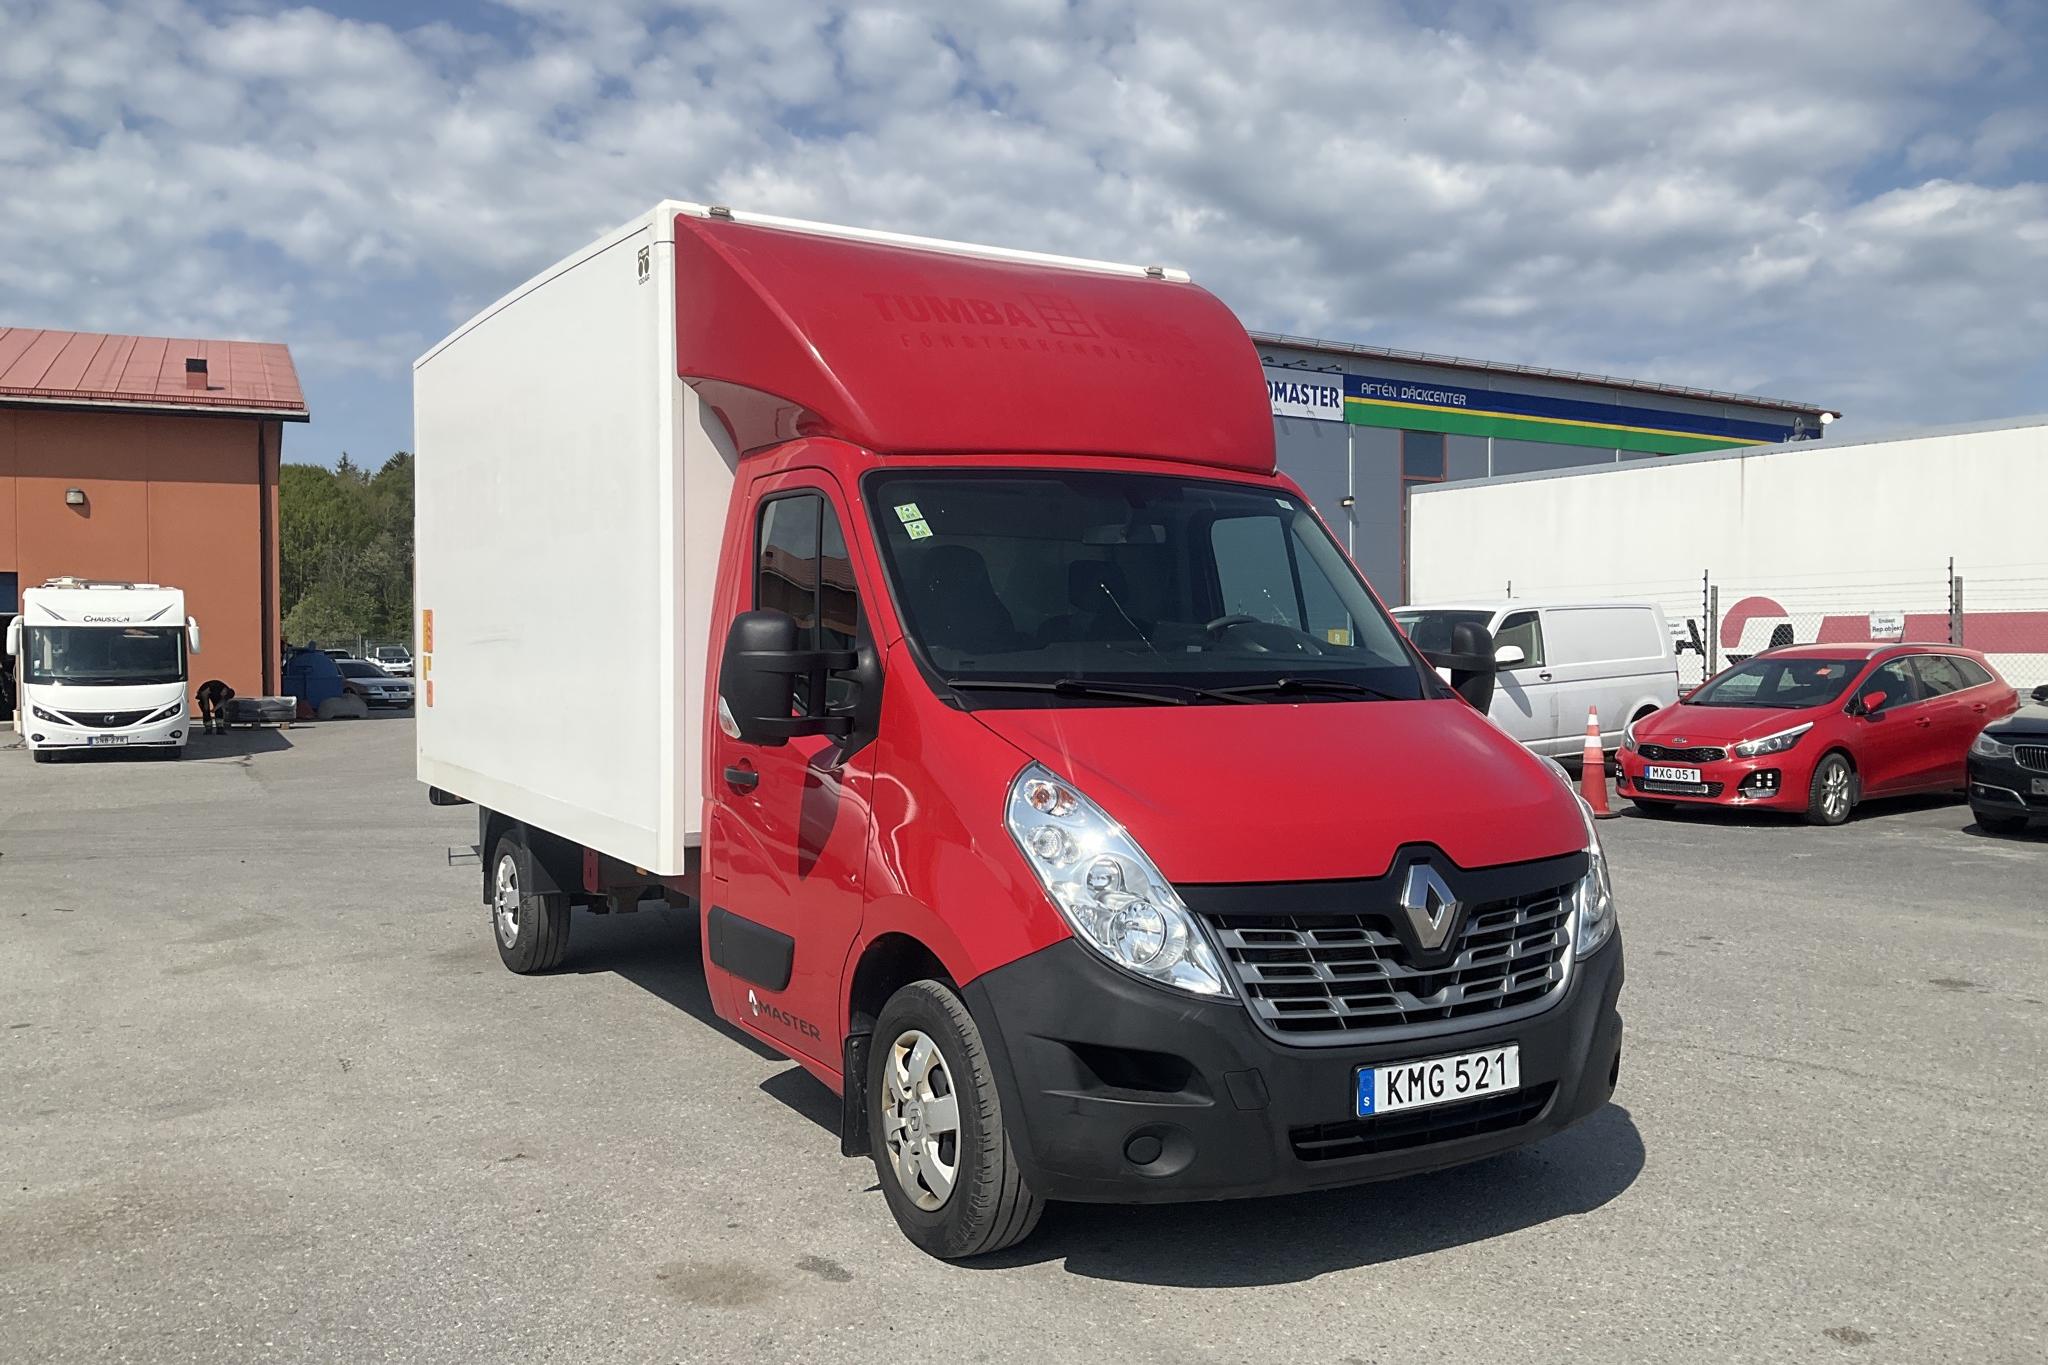 Renault Master 2.3 dCi Volymskåp 2WD (170hk) - 58 700 km - Automatic - red - 2018